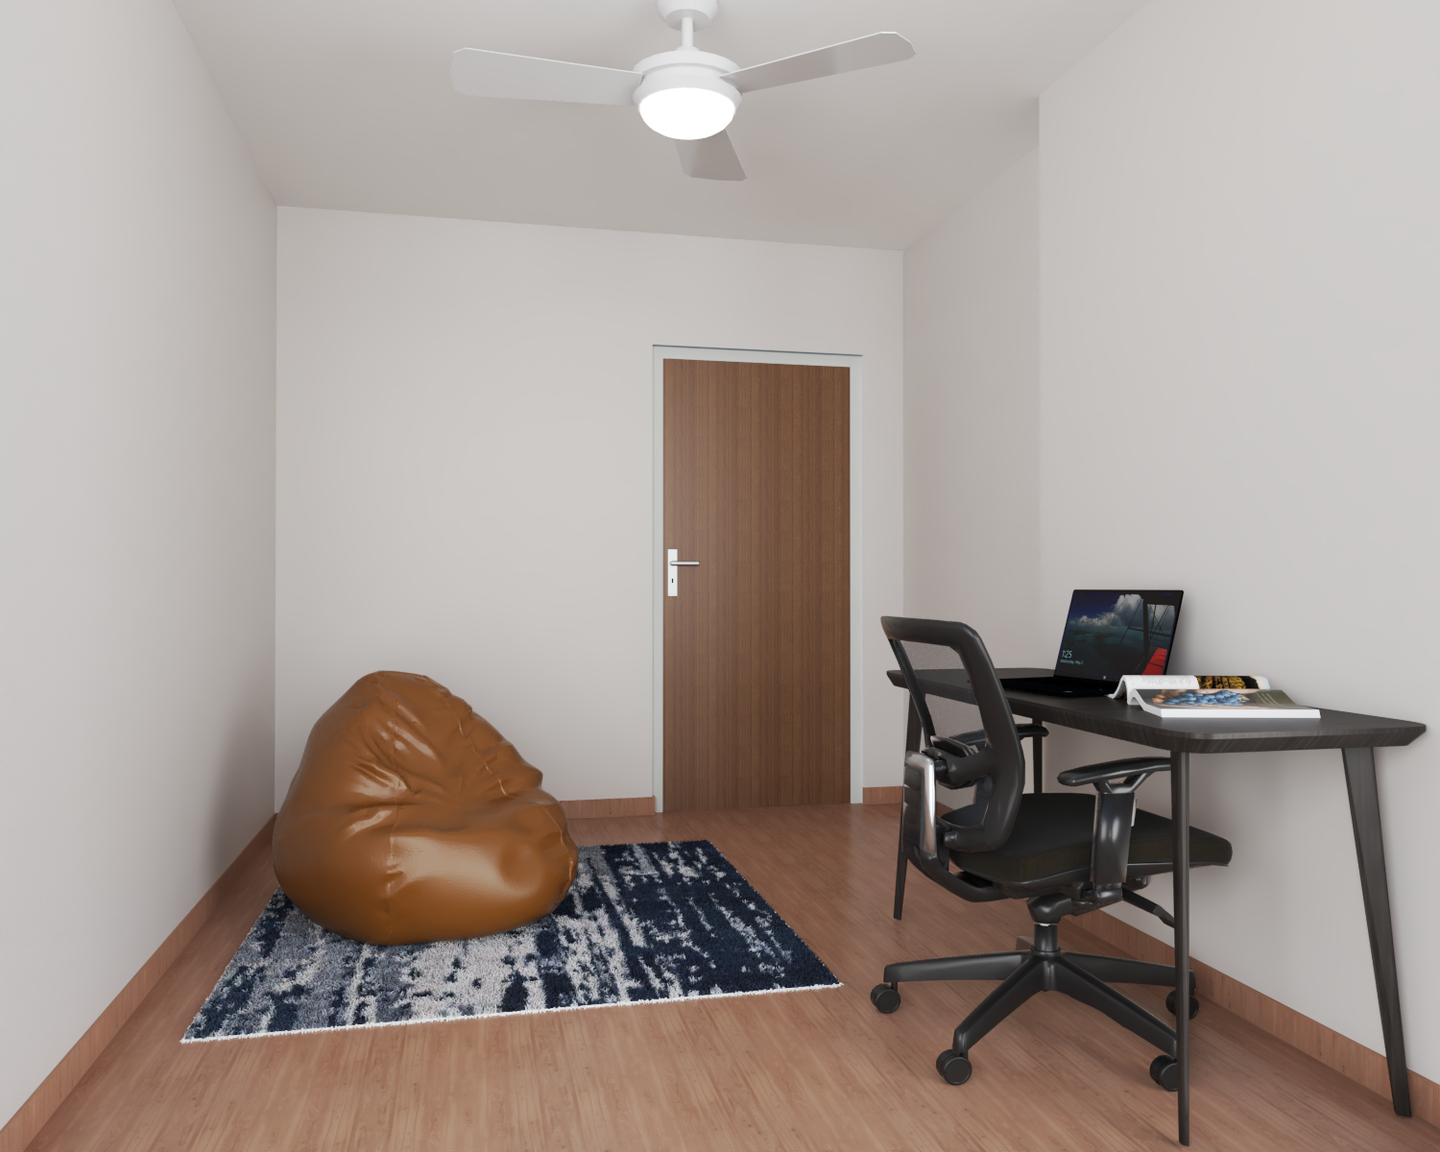 Compact Study Room With Basic layout - Livspace